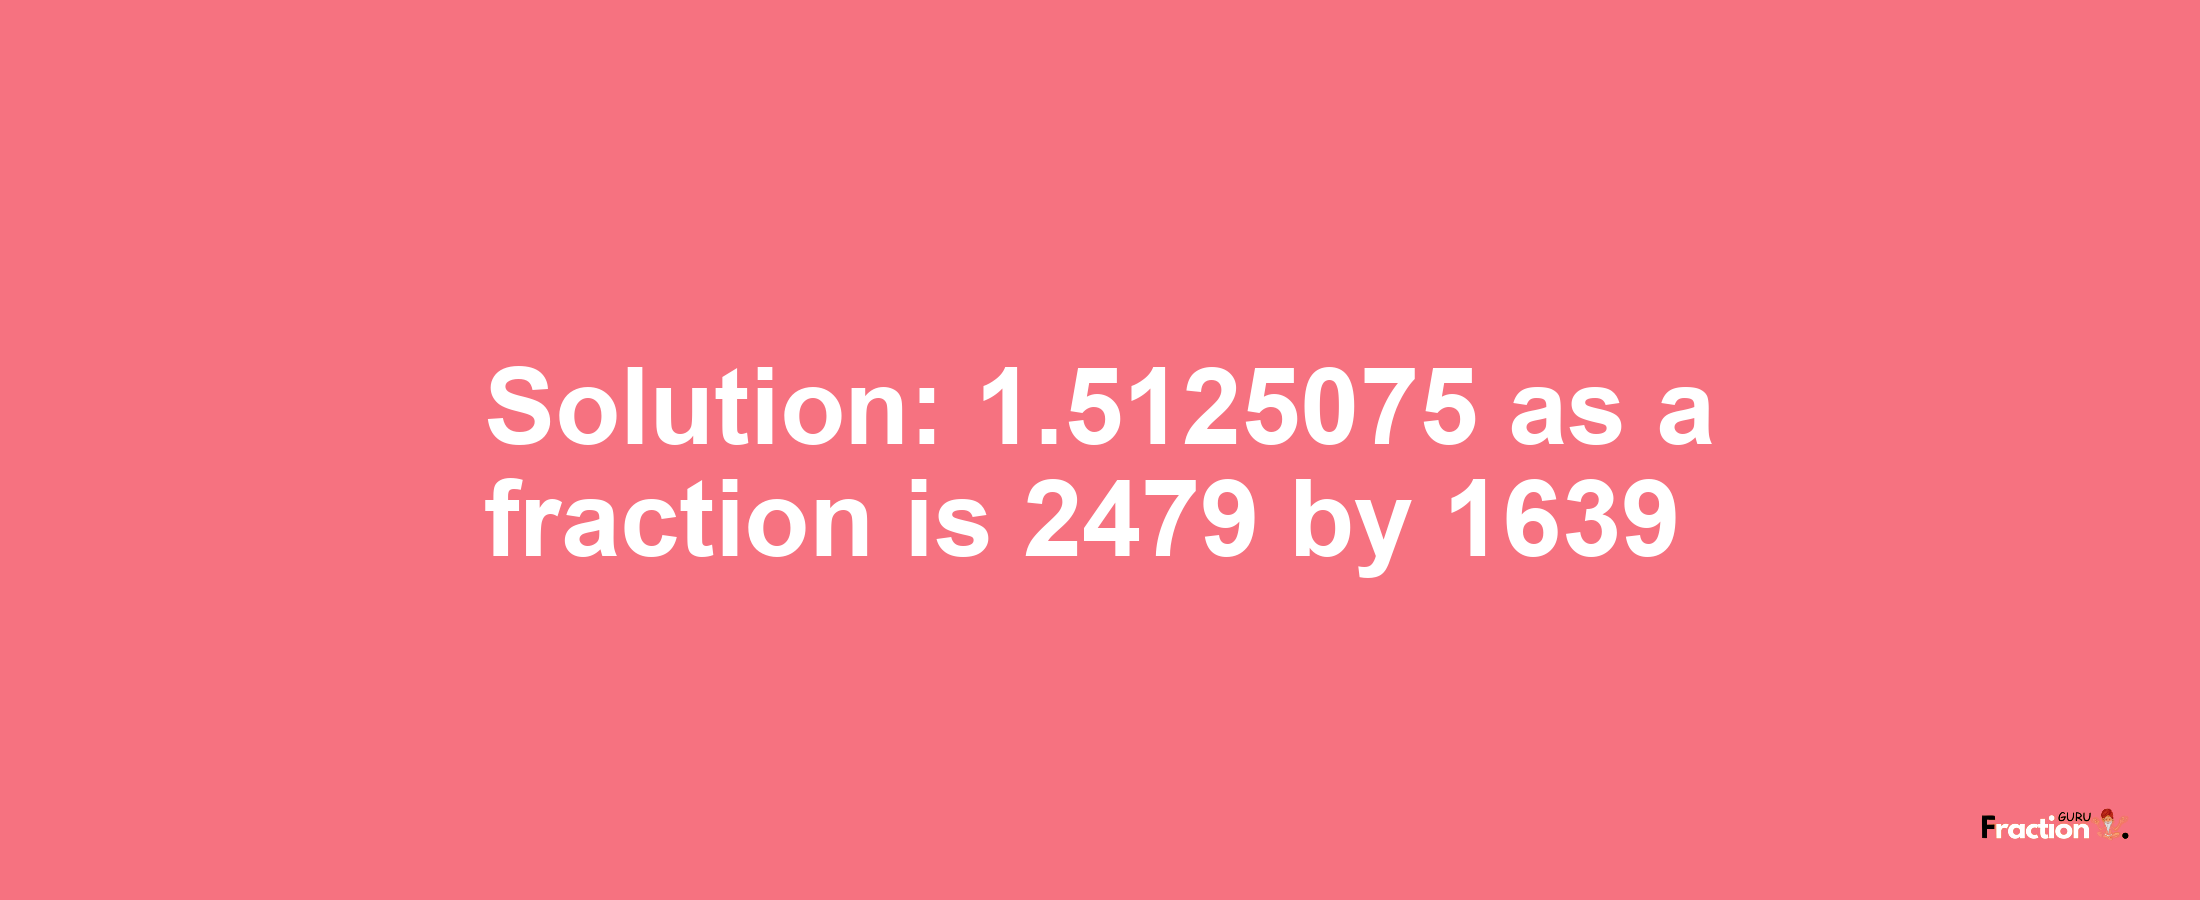 Solution:1.5125075 as a fraction is 2479/1639